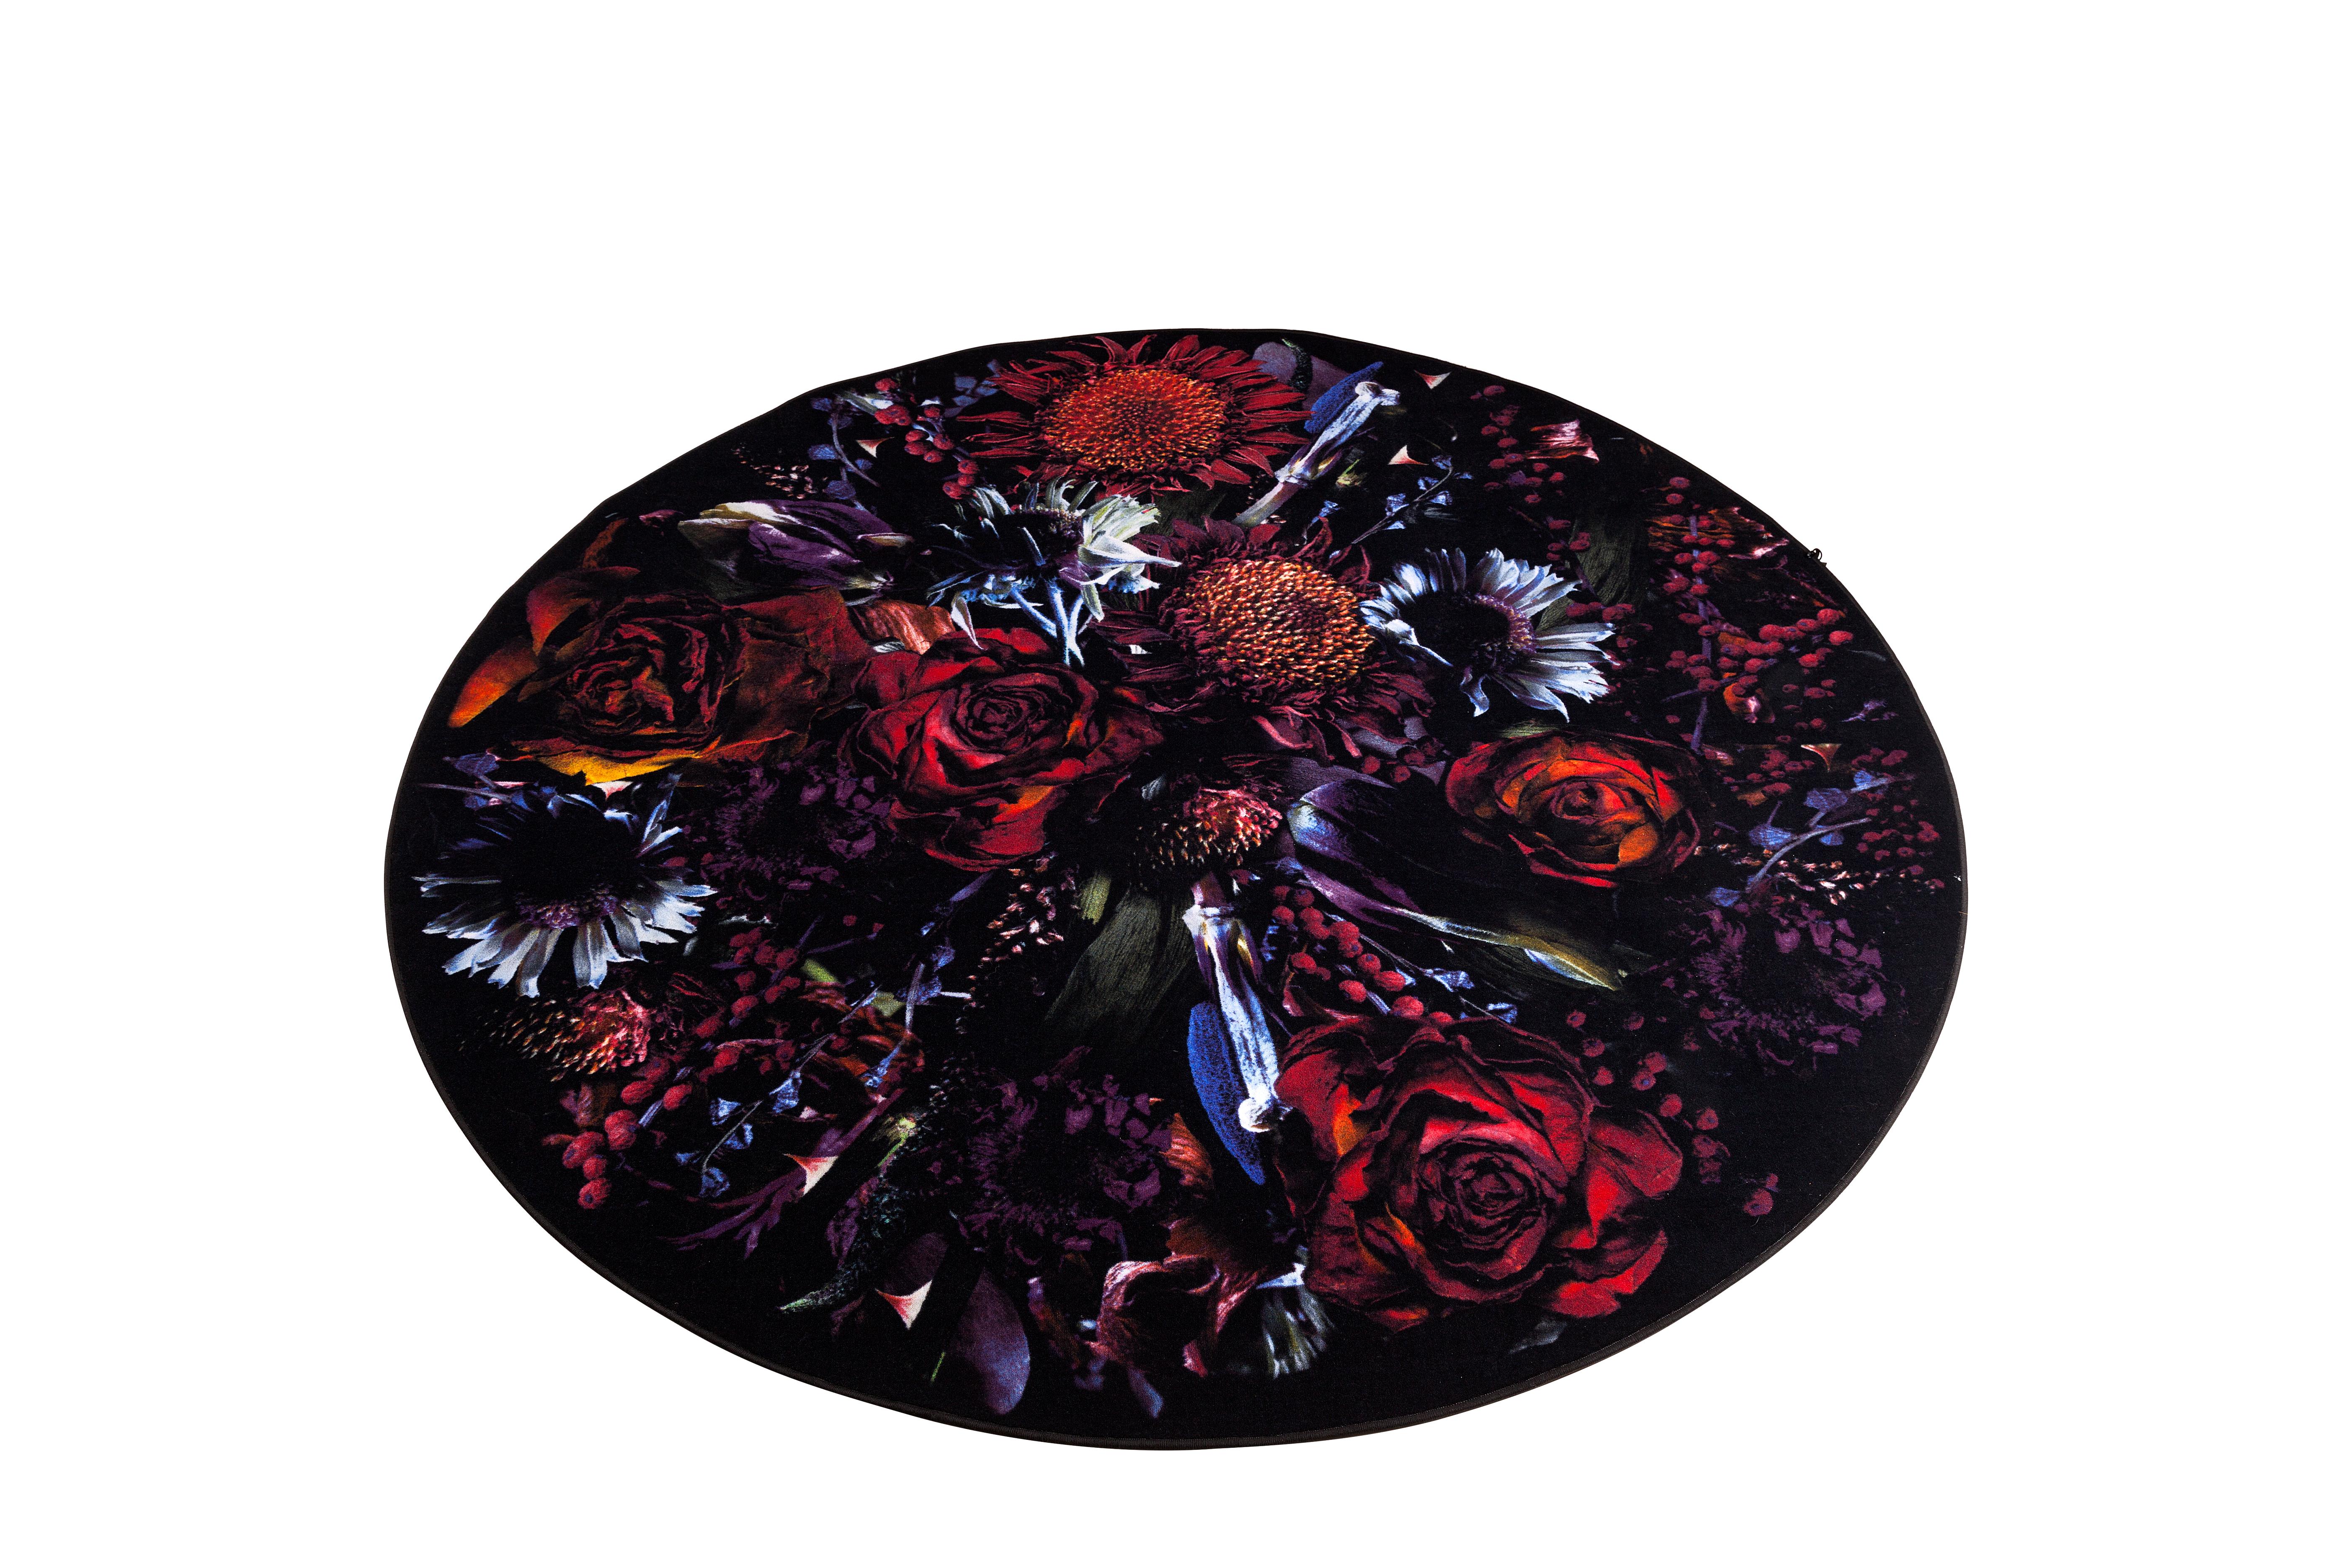 Moooi Small Fool’s Paradise Round Rug in Soft Yarn Polyamide

Marcel Wanders studio is a leading product and interior design studio located in the creative capital of Amsterdam. The studio has over 1,900 + iconic product and interior design